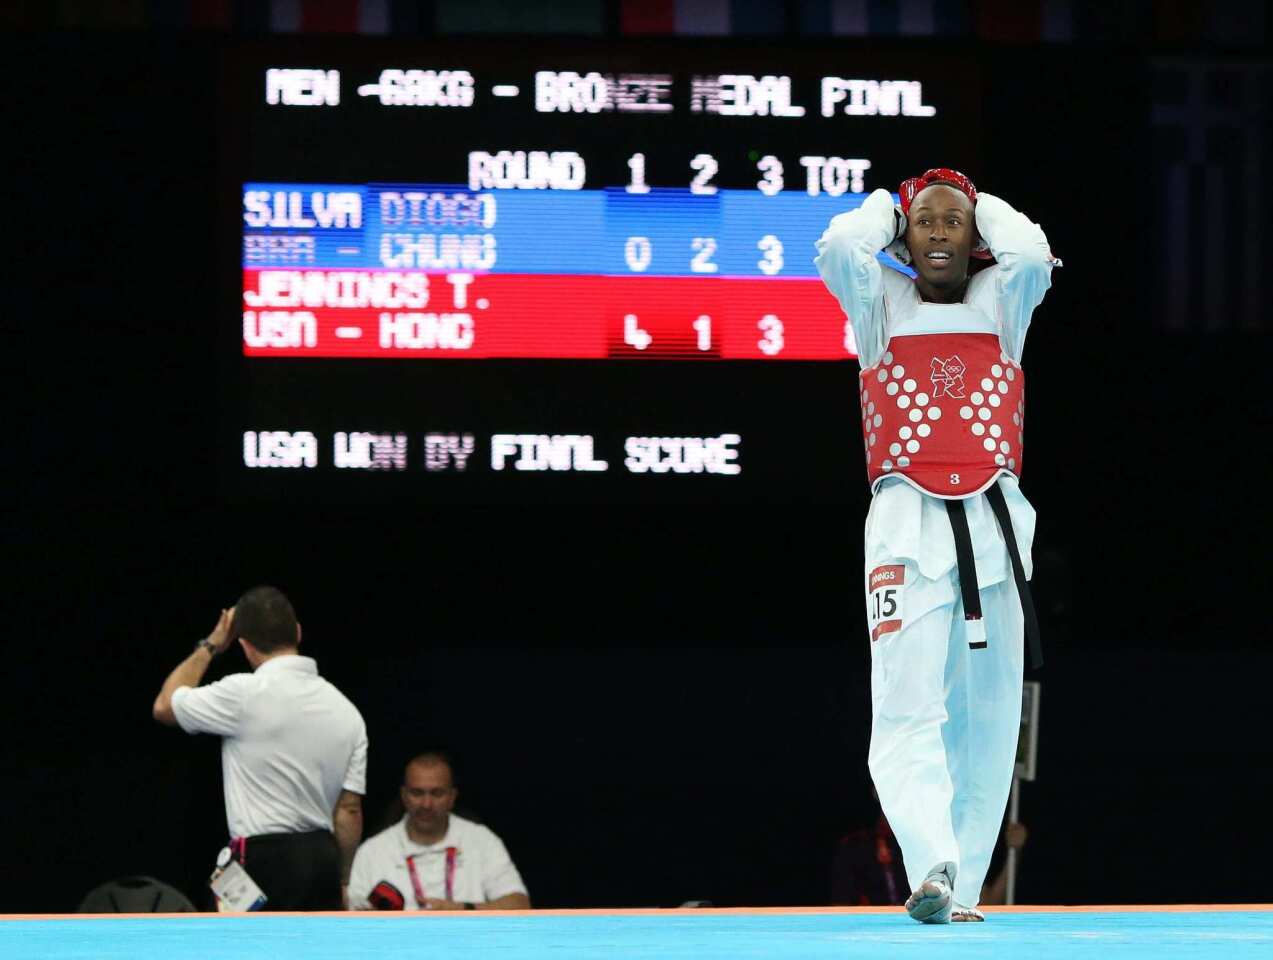 Terrance Jennings of the United States looks on in disbelief at the end of his match against Diogo Silva of Brazil in the men's taekwondo 68kg bronze medal match. Jennings won, 8-5.